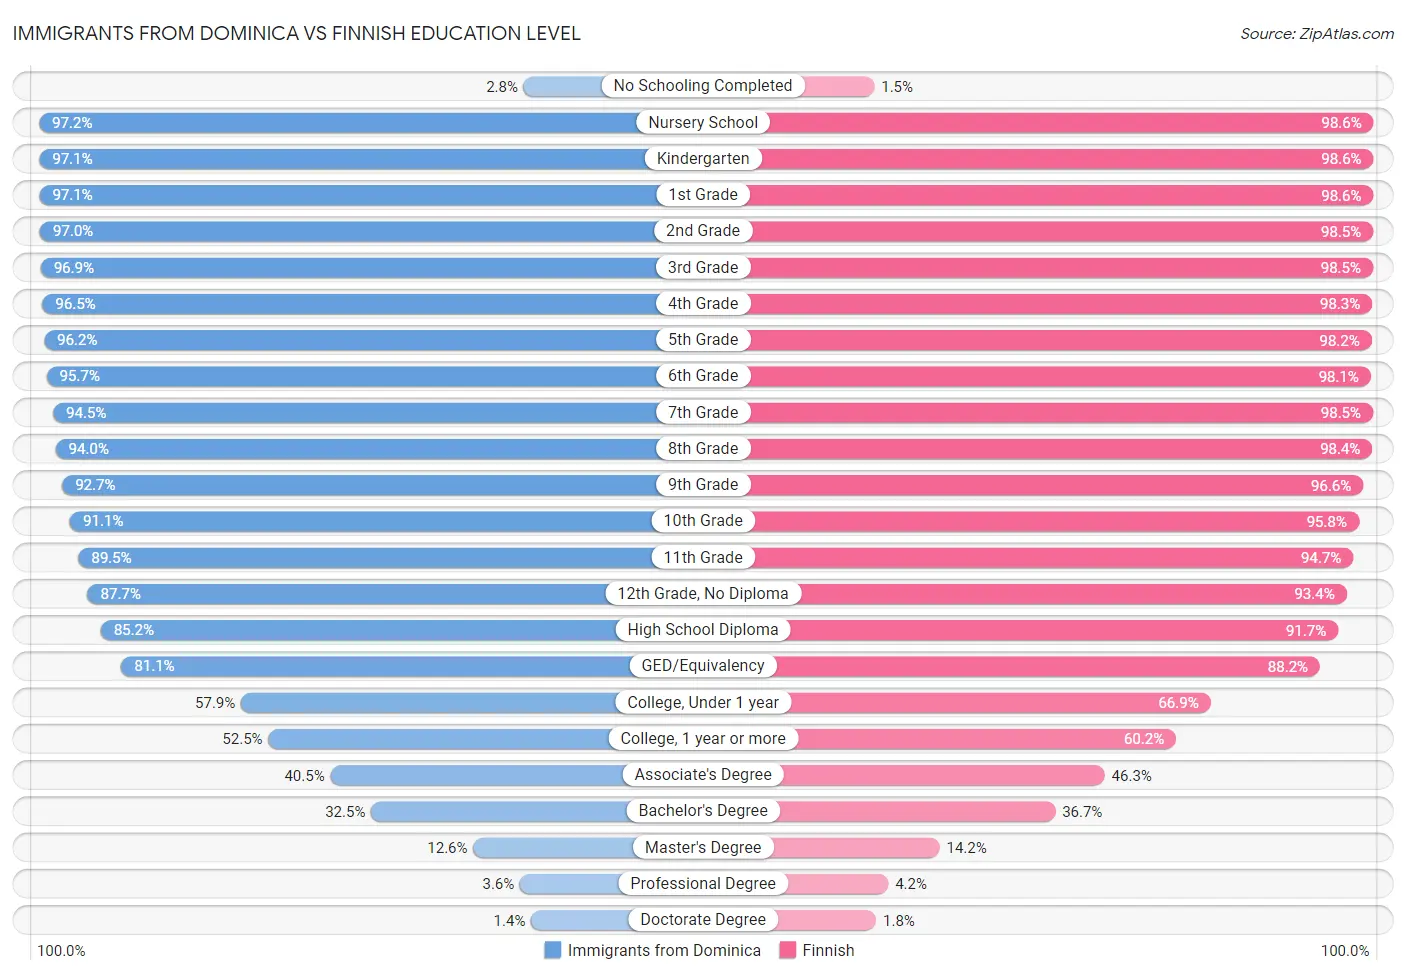 Immigrants from Dominica vs Finnish Education Level